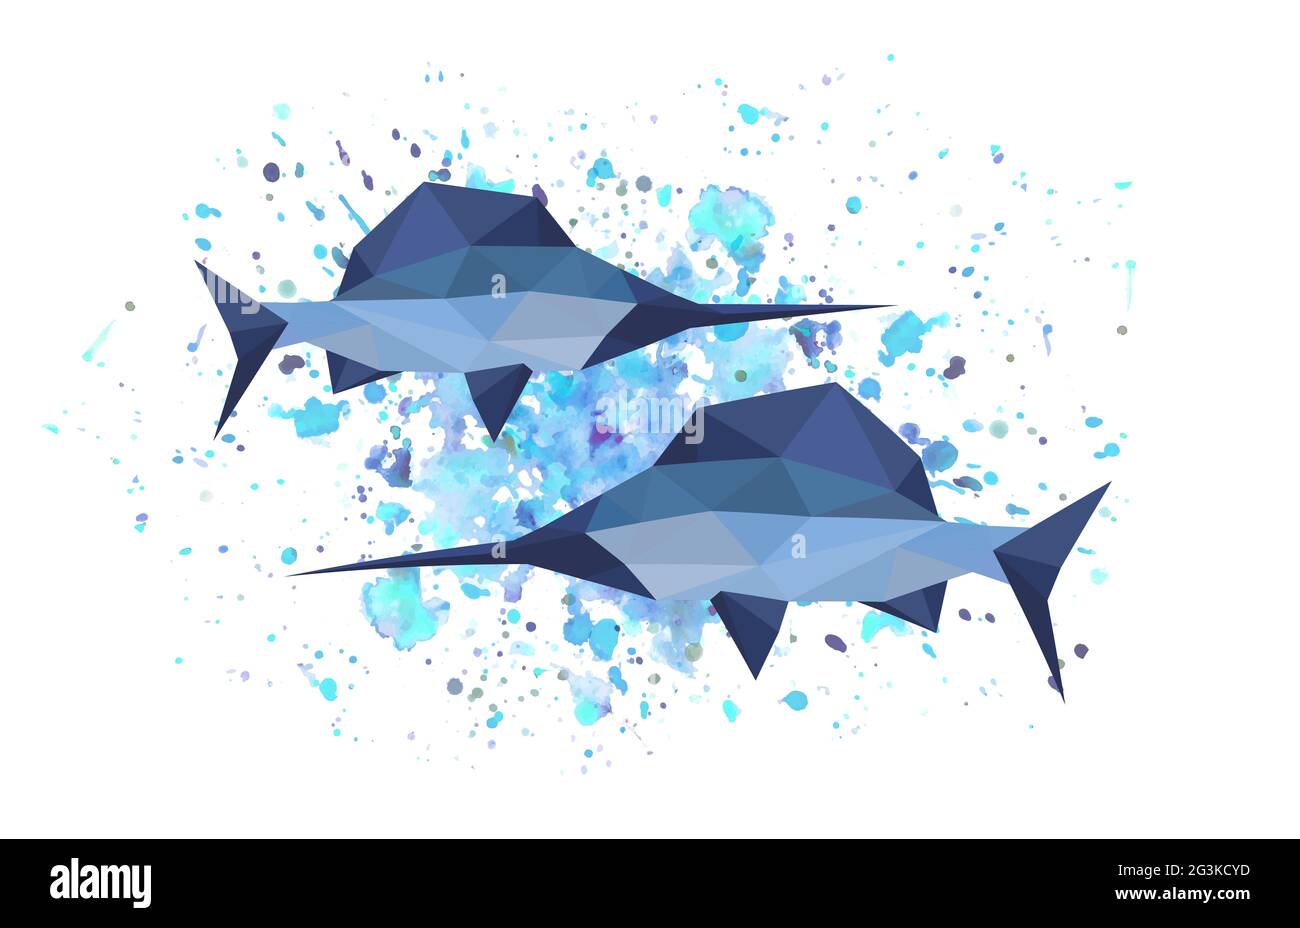 Illustration of origami sword fish on abstract background Stock Photo